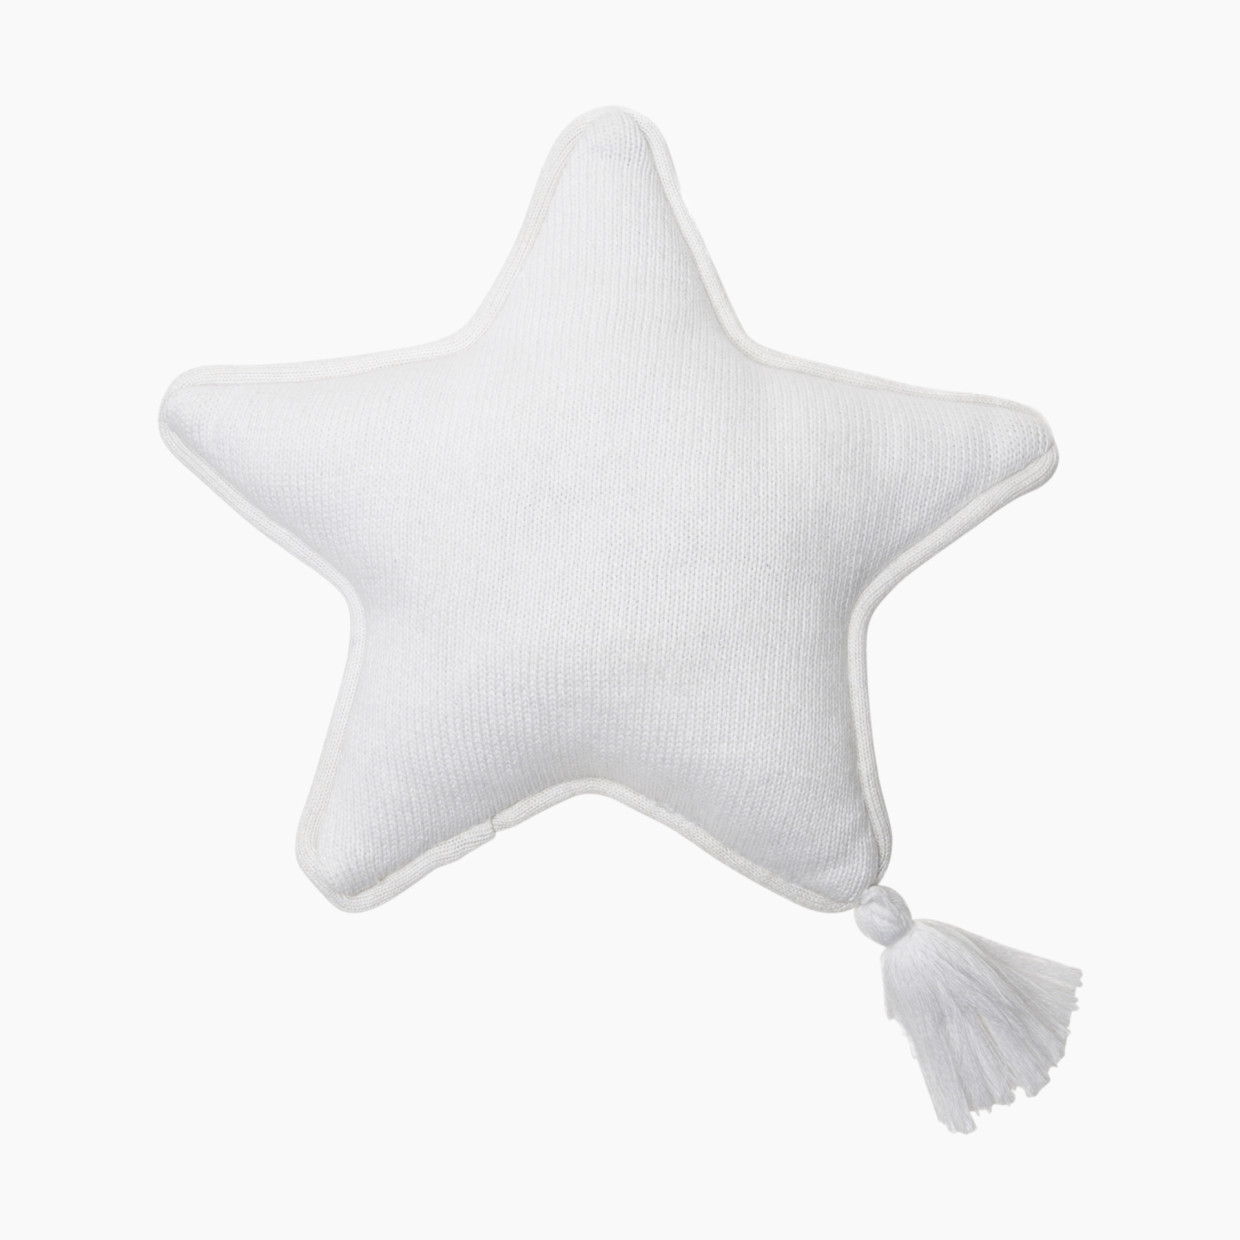 Lorena Canals Knitted Cushion Twinkle Star - Ivory.